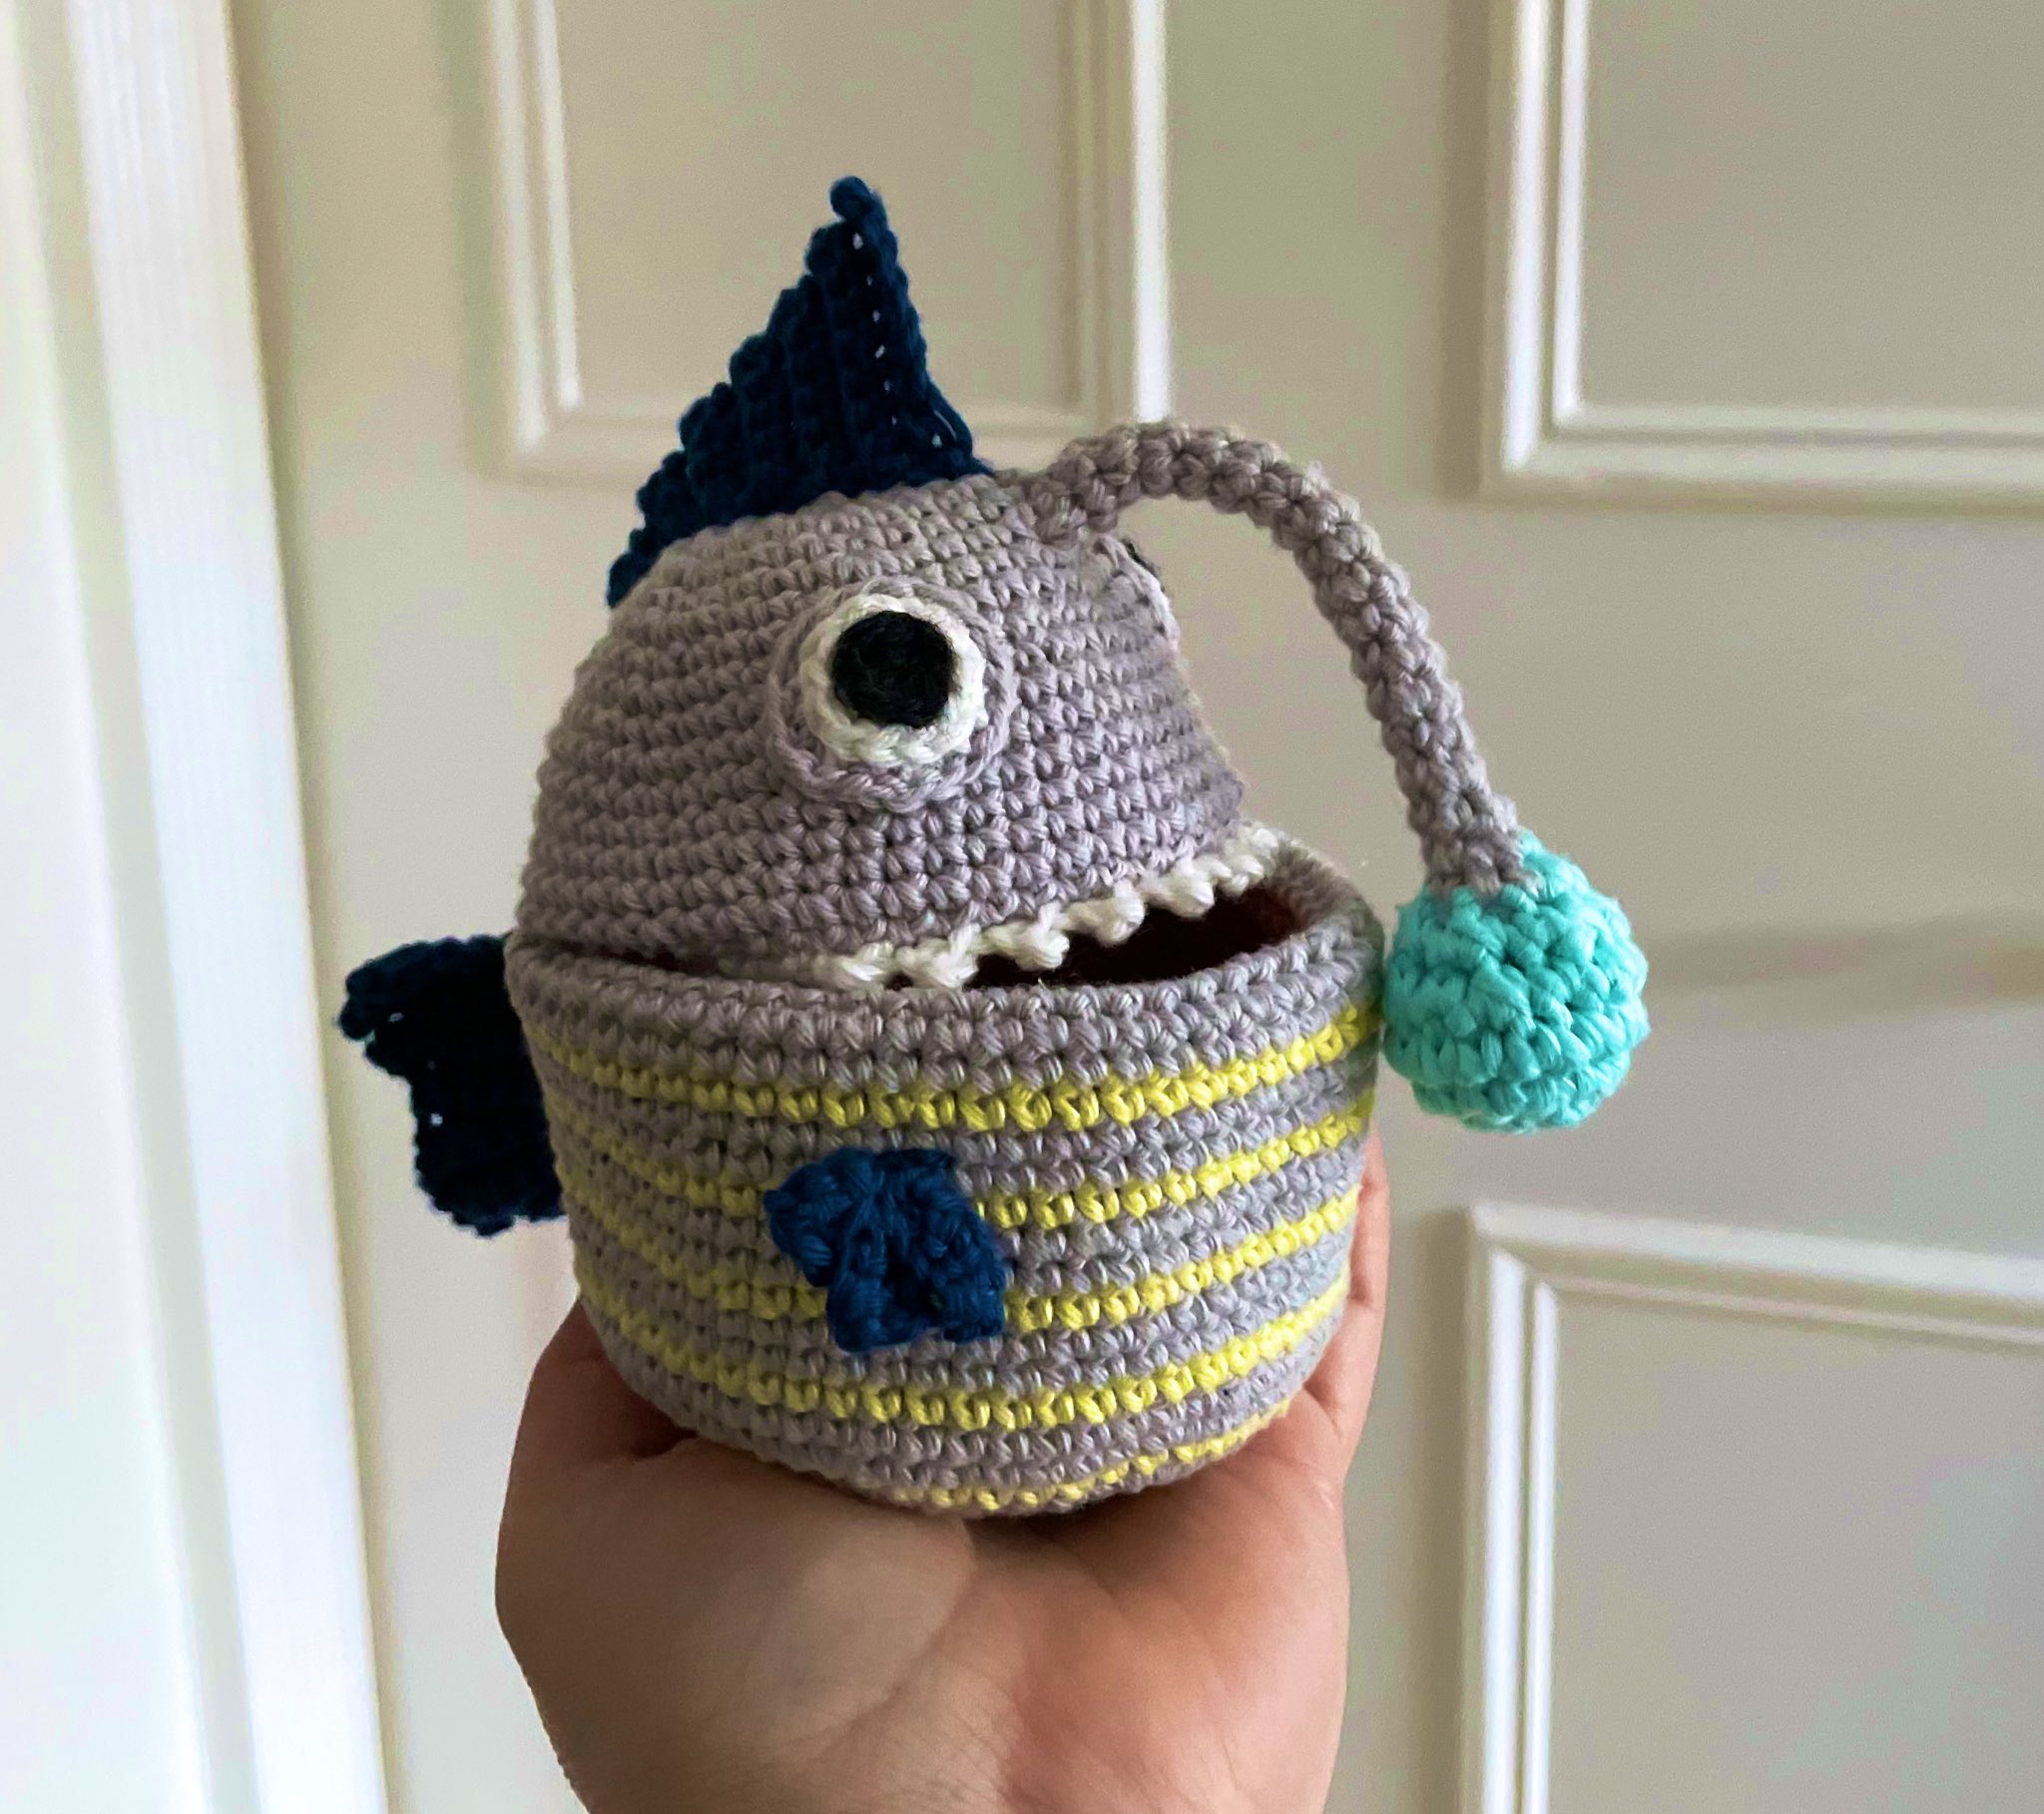 Pip on X: I made an anglerfish to keep my hair elastics in! The lure at  the end of its fishing rod is made from glow in the dark wool, so it